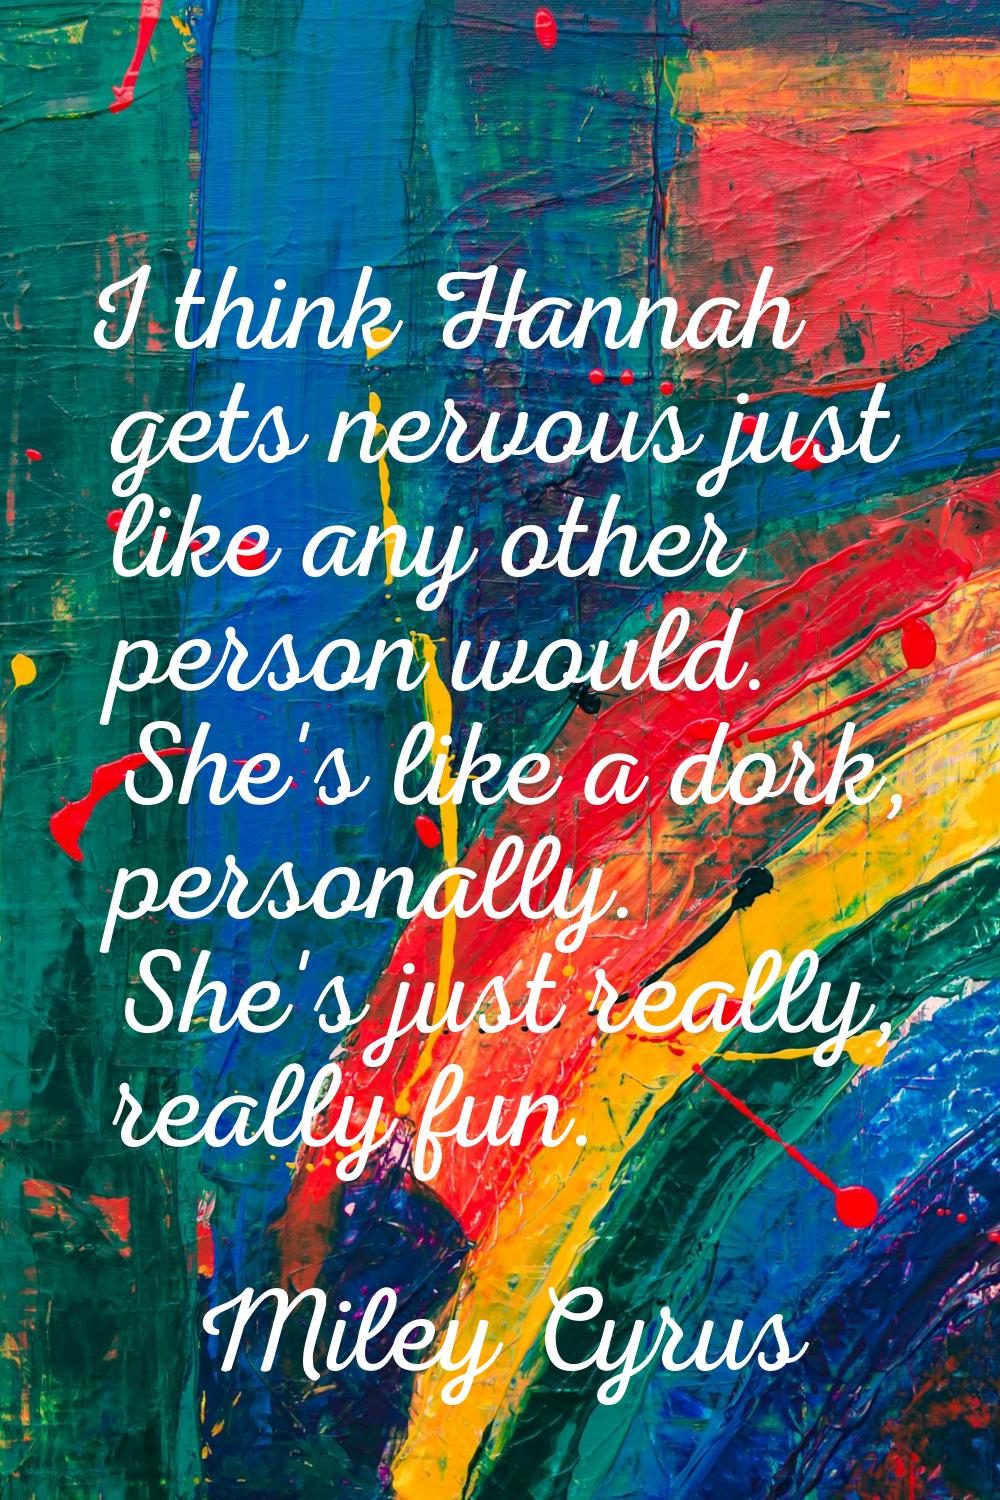 I think Hannah gets nervous just like any other person would. She's like a dork, personally. She's 